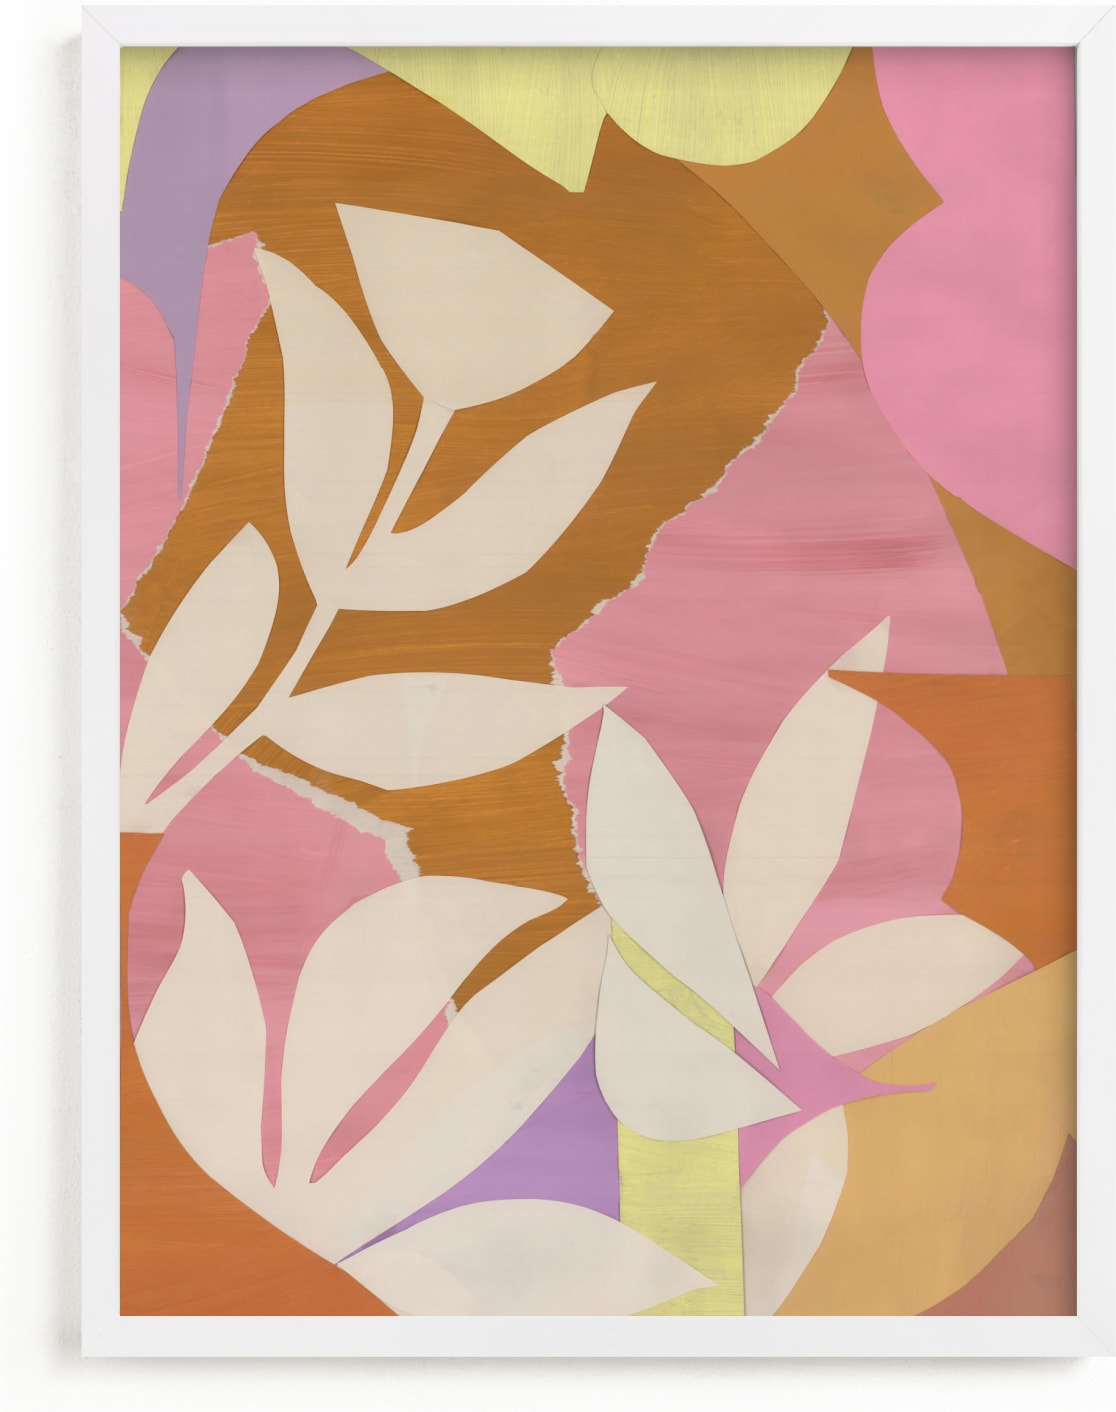 This is a yellow, pink, orange art by cyrille gulassa called Blossom's Breath.